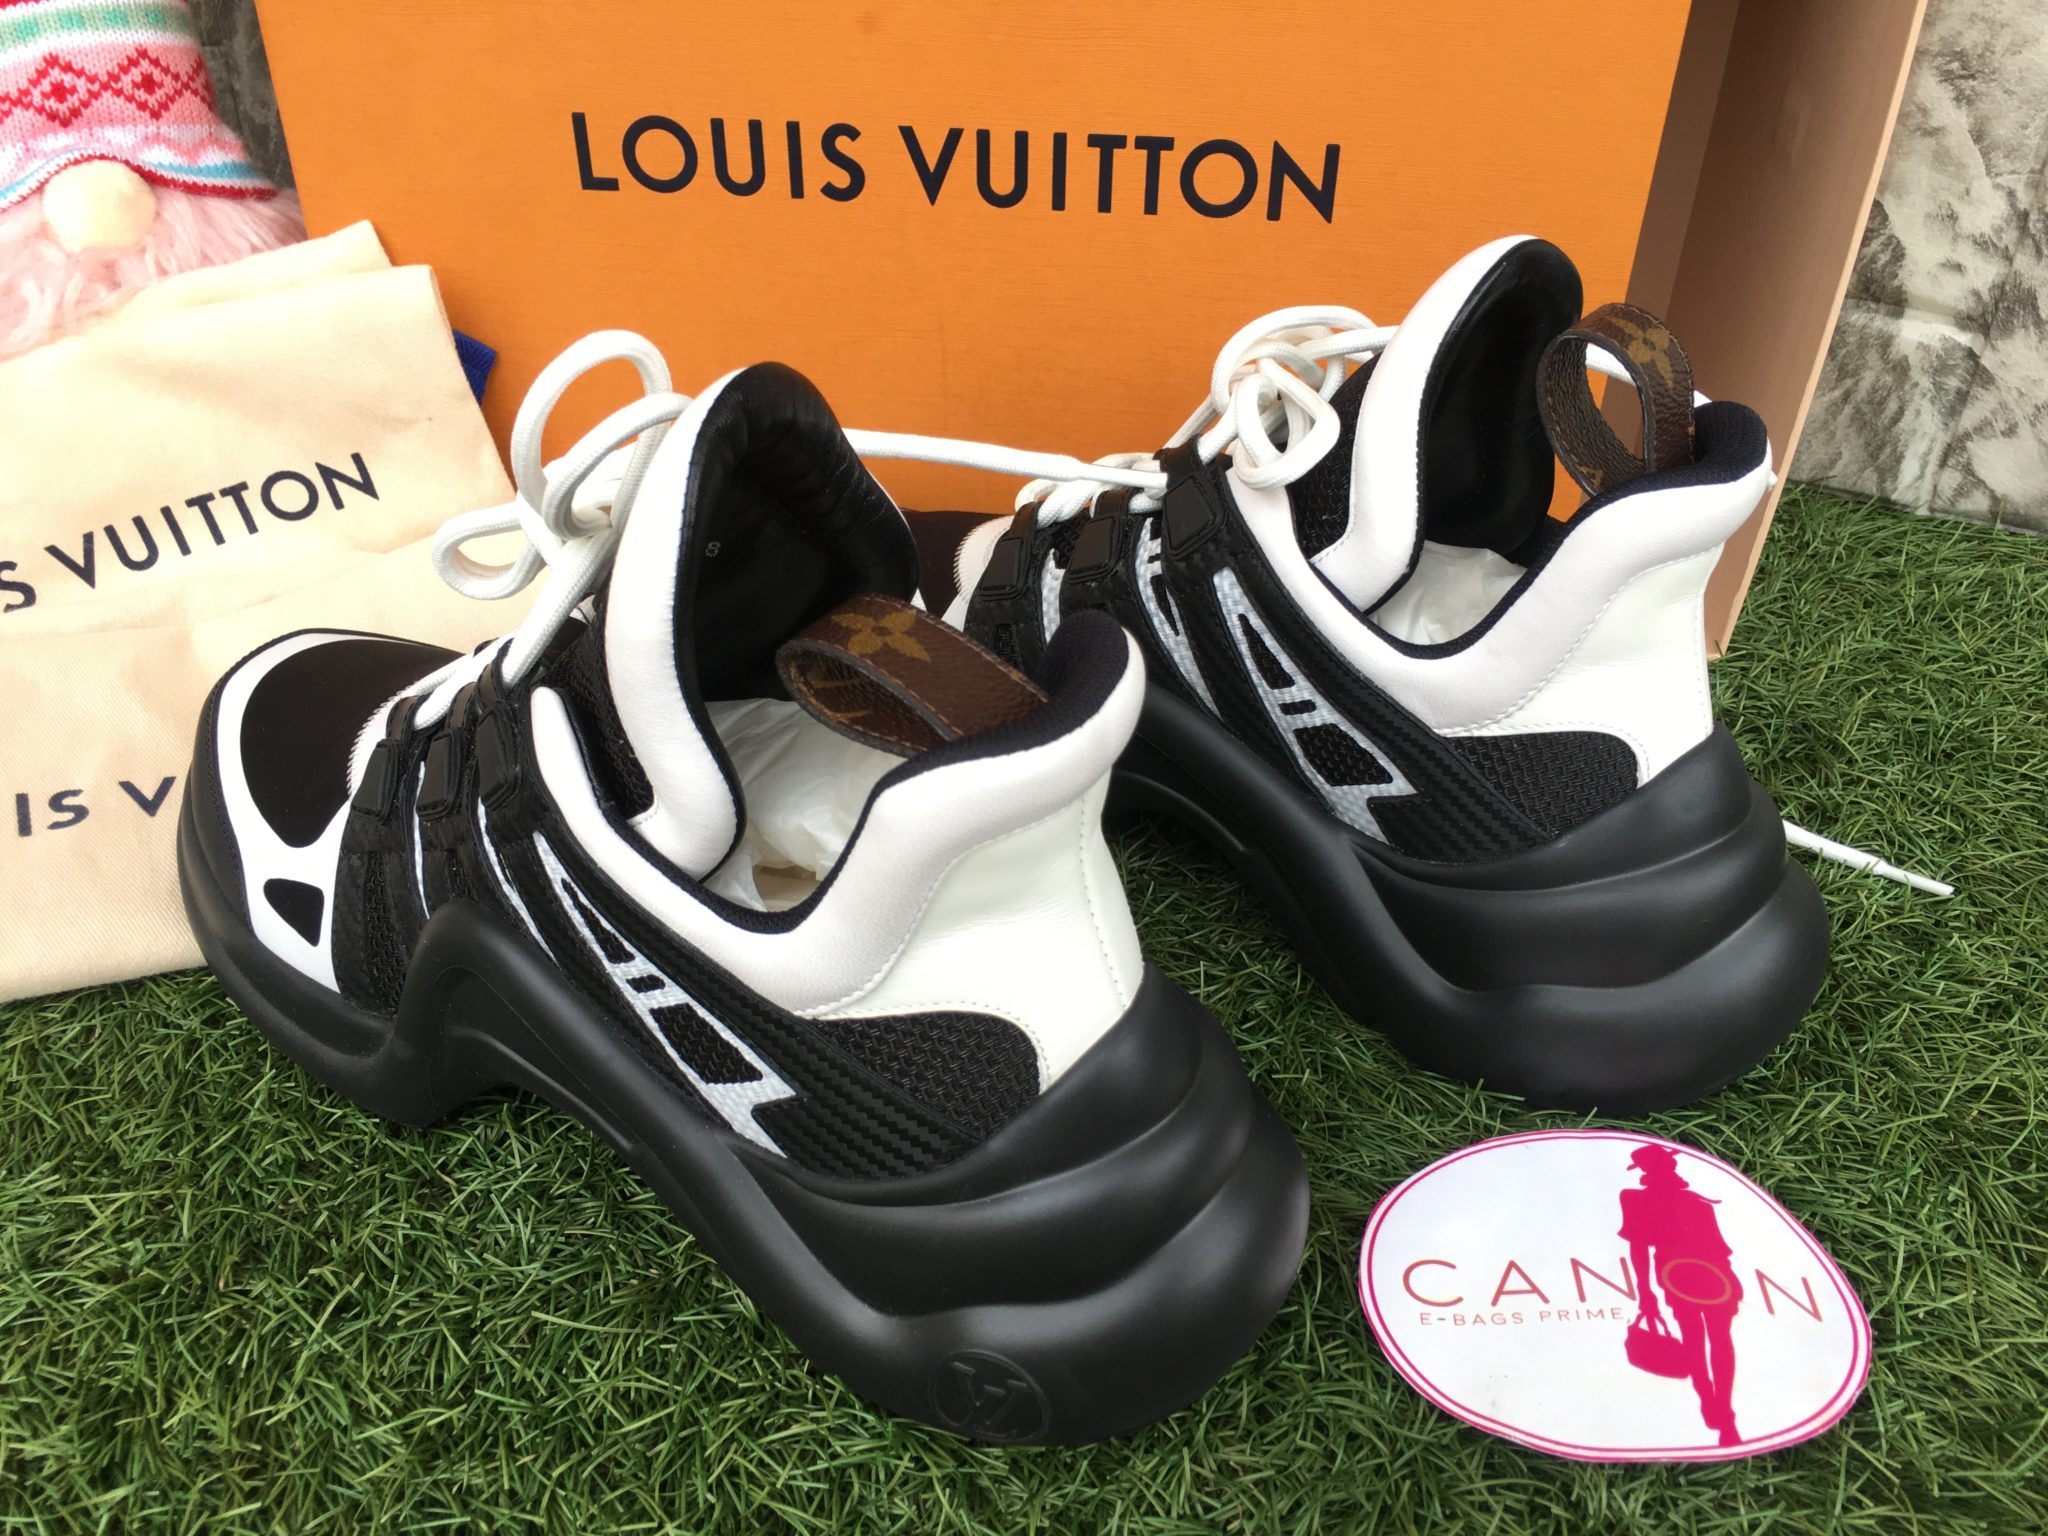 Archlight leather trainers Louis Vuitton Black size 40 EU in